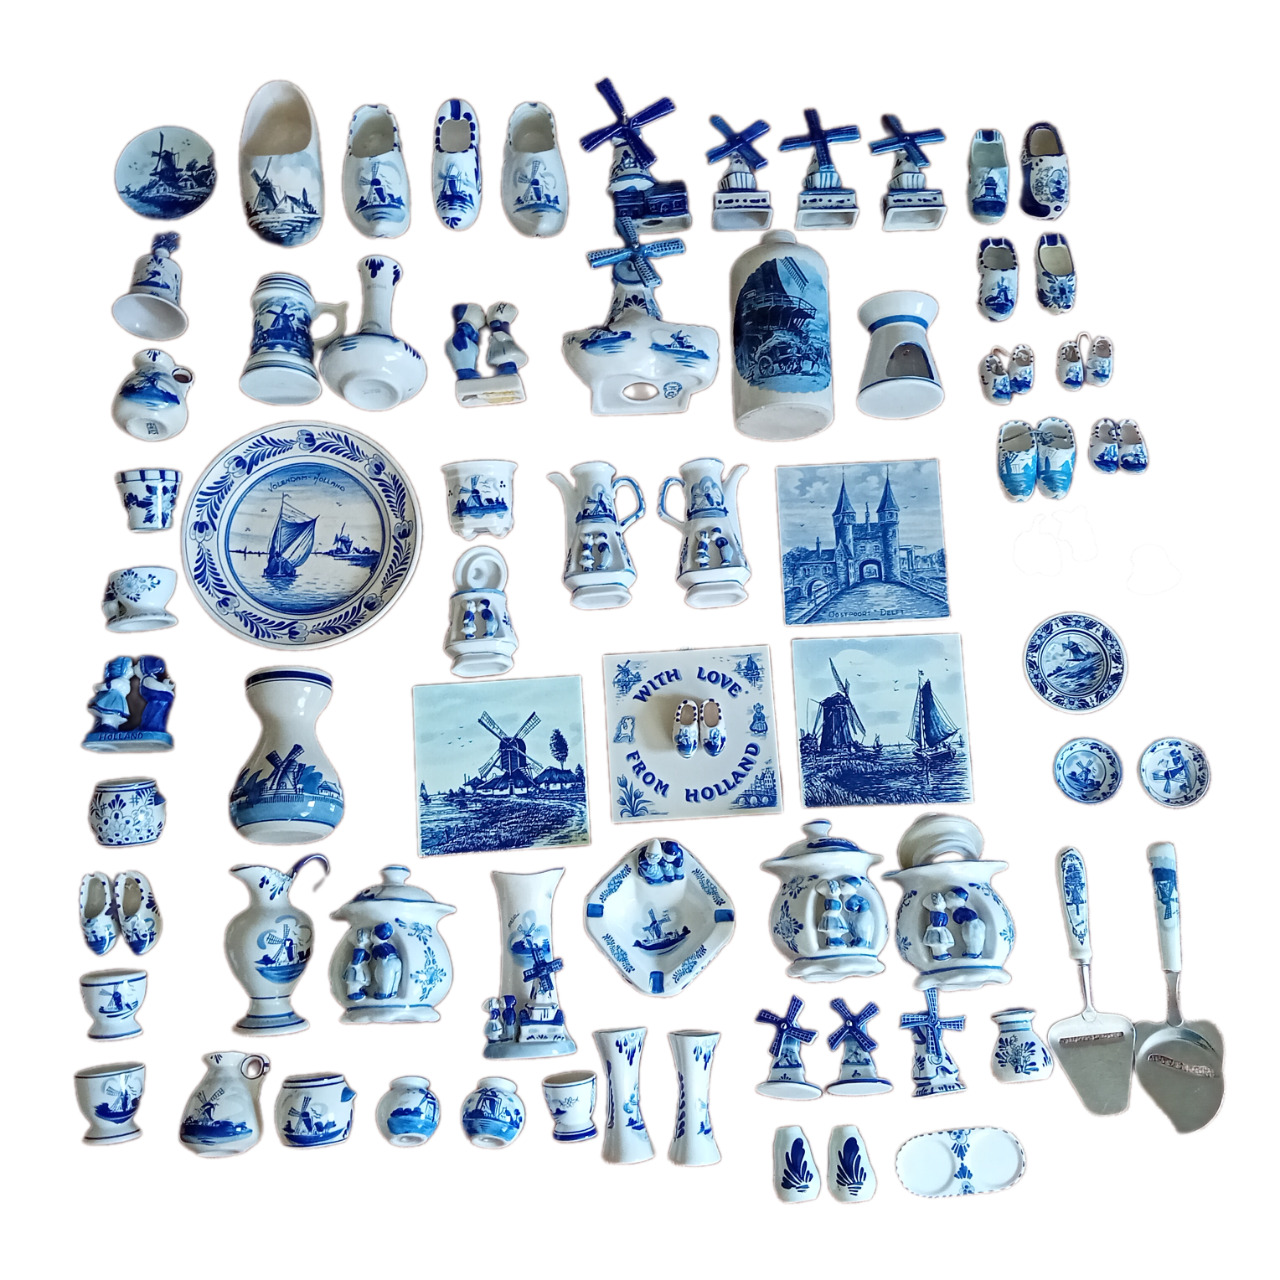 Top Ceramics in the Dutch style - 60 pieces